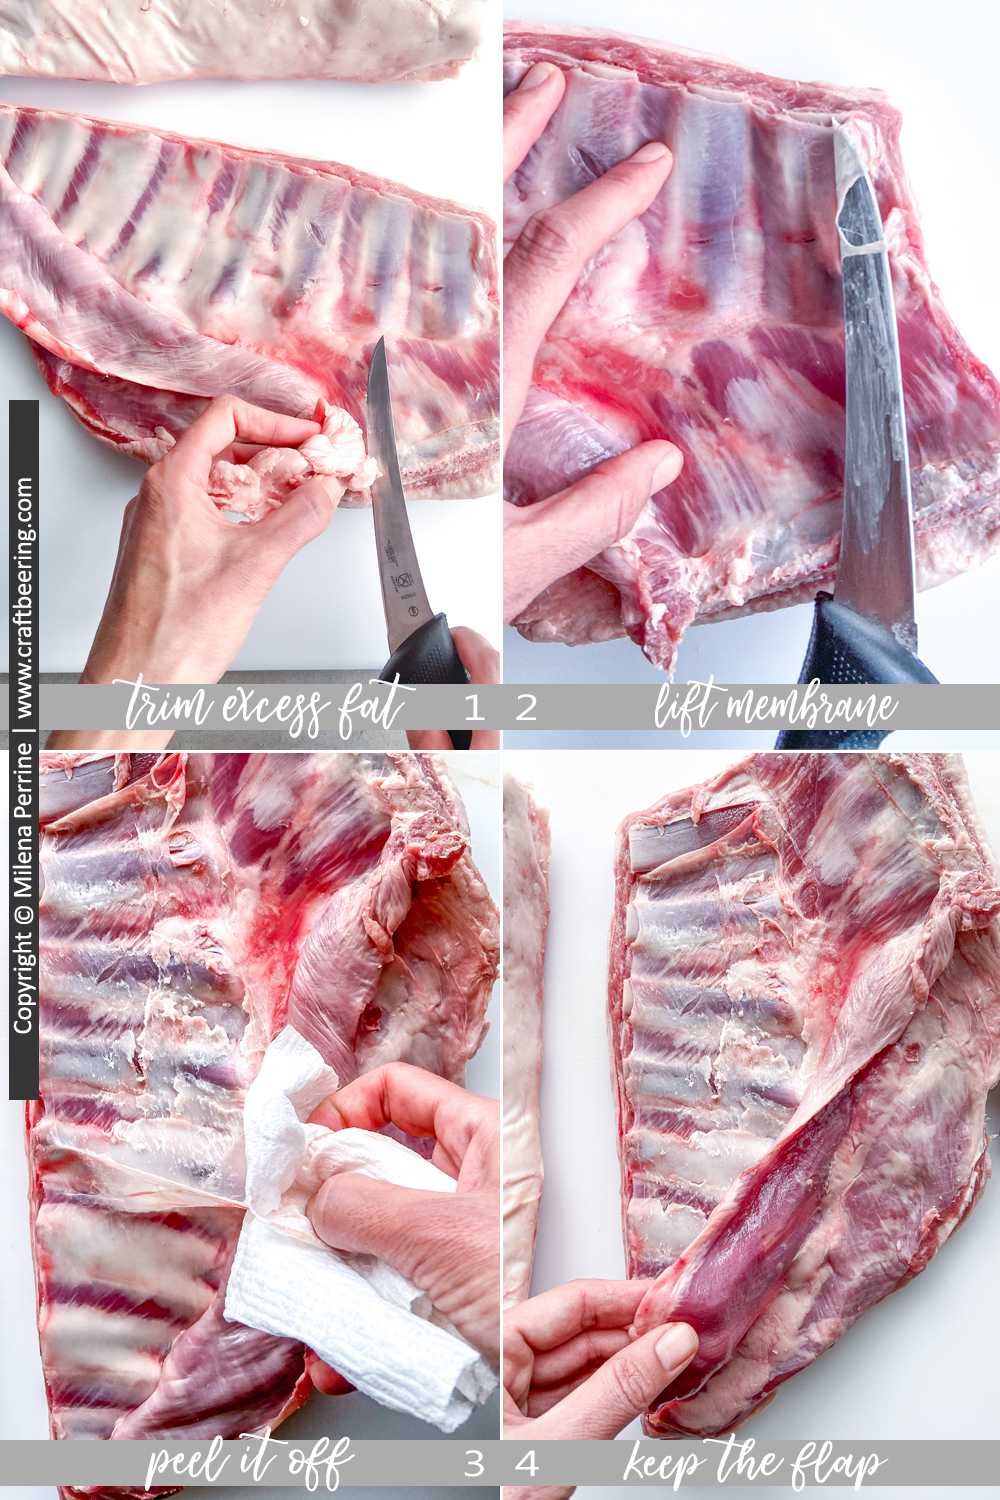 How to prepare lamb breast for cooking.